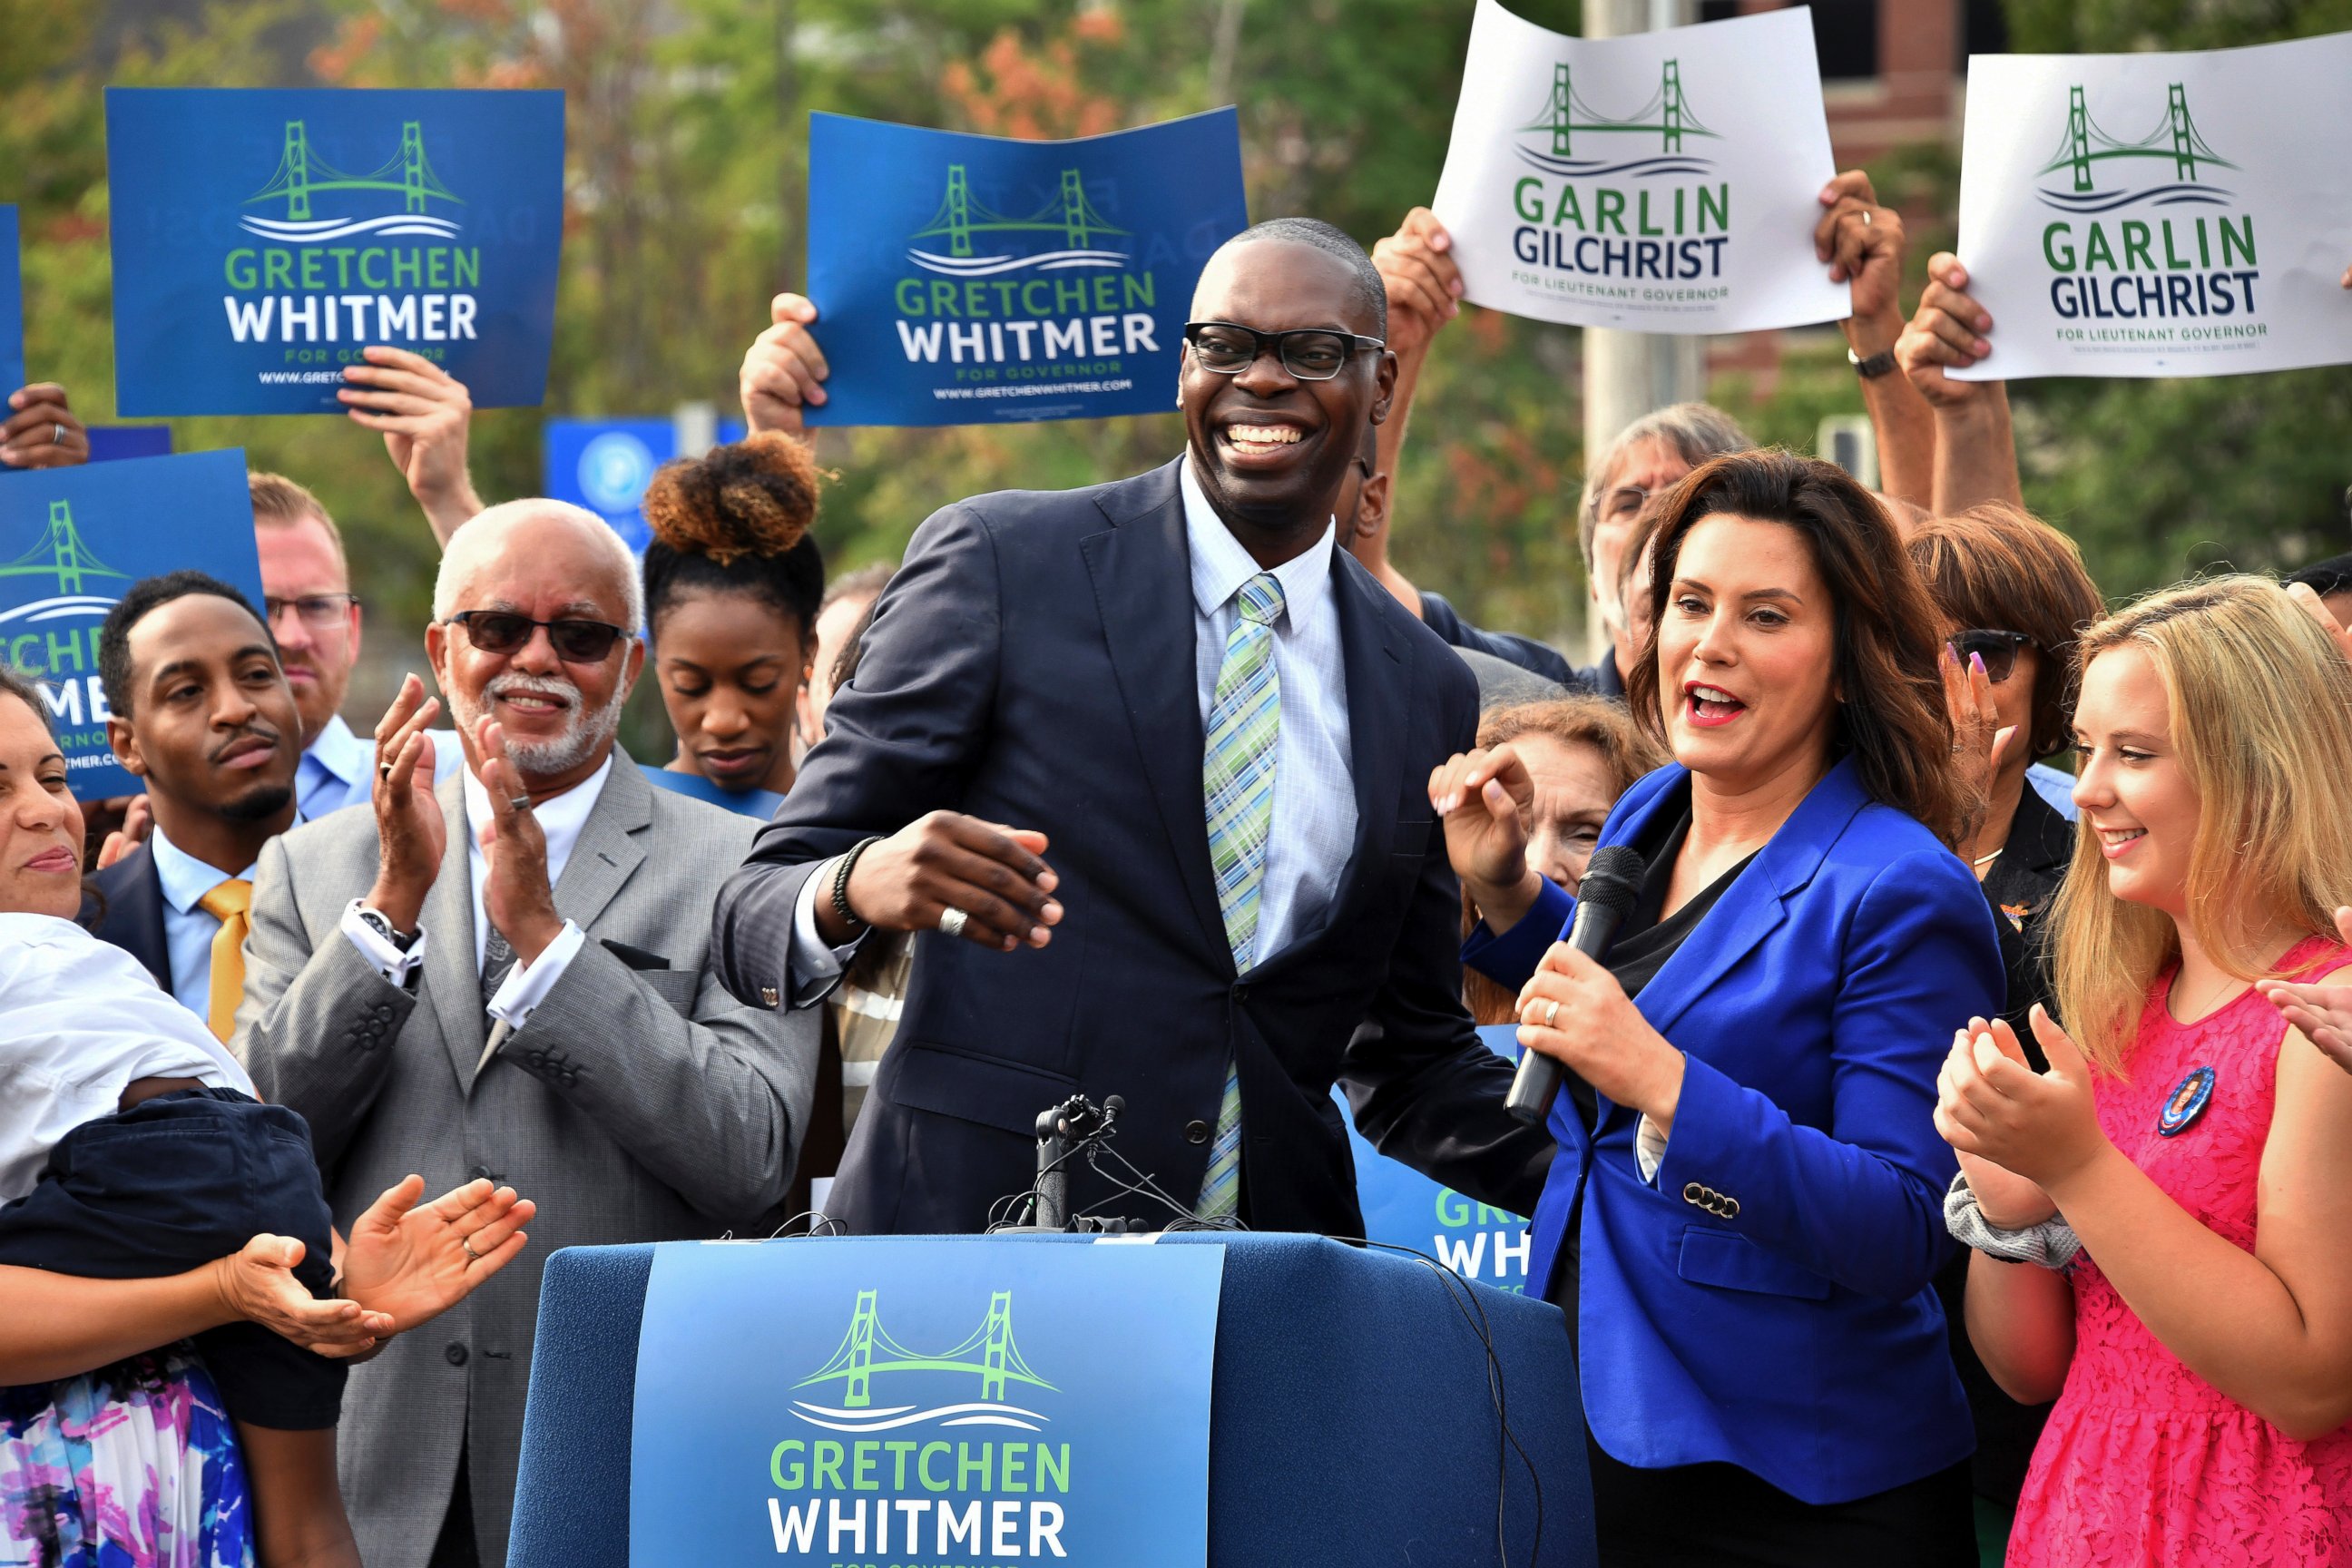 PHOTO: Democratic candidate for governor, Gretchen Whitmer, right, announces that her running mate is Garlin Gilchrist II, center, during an event in downtown Lansing, Mich., on Monday, Aug 20, 2018. 